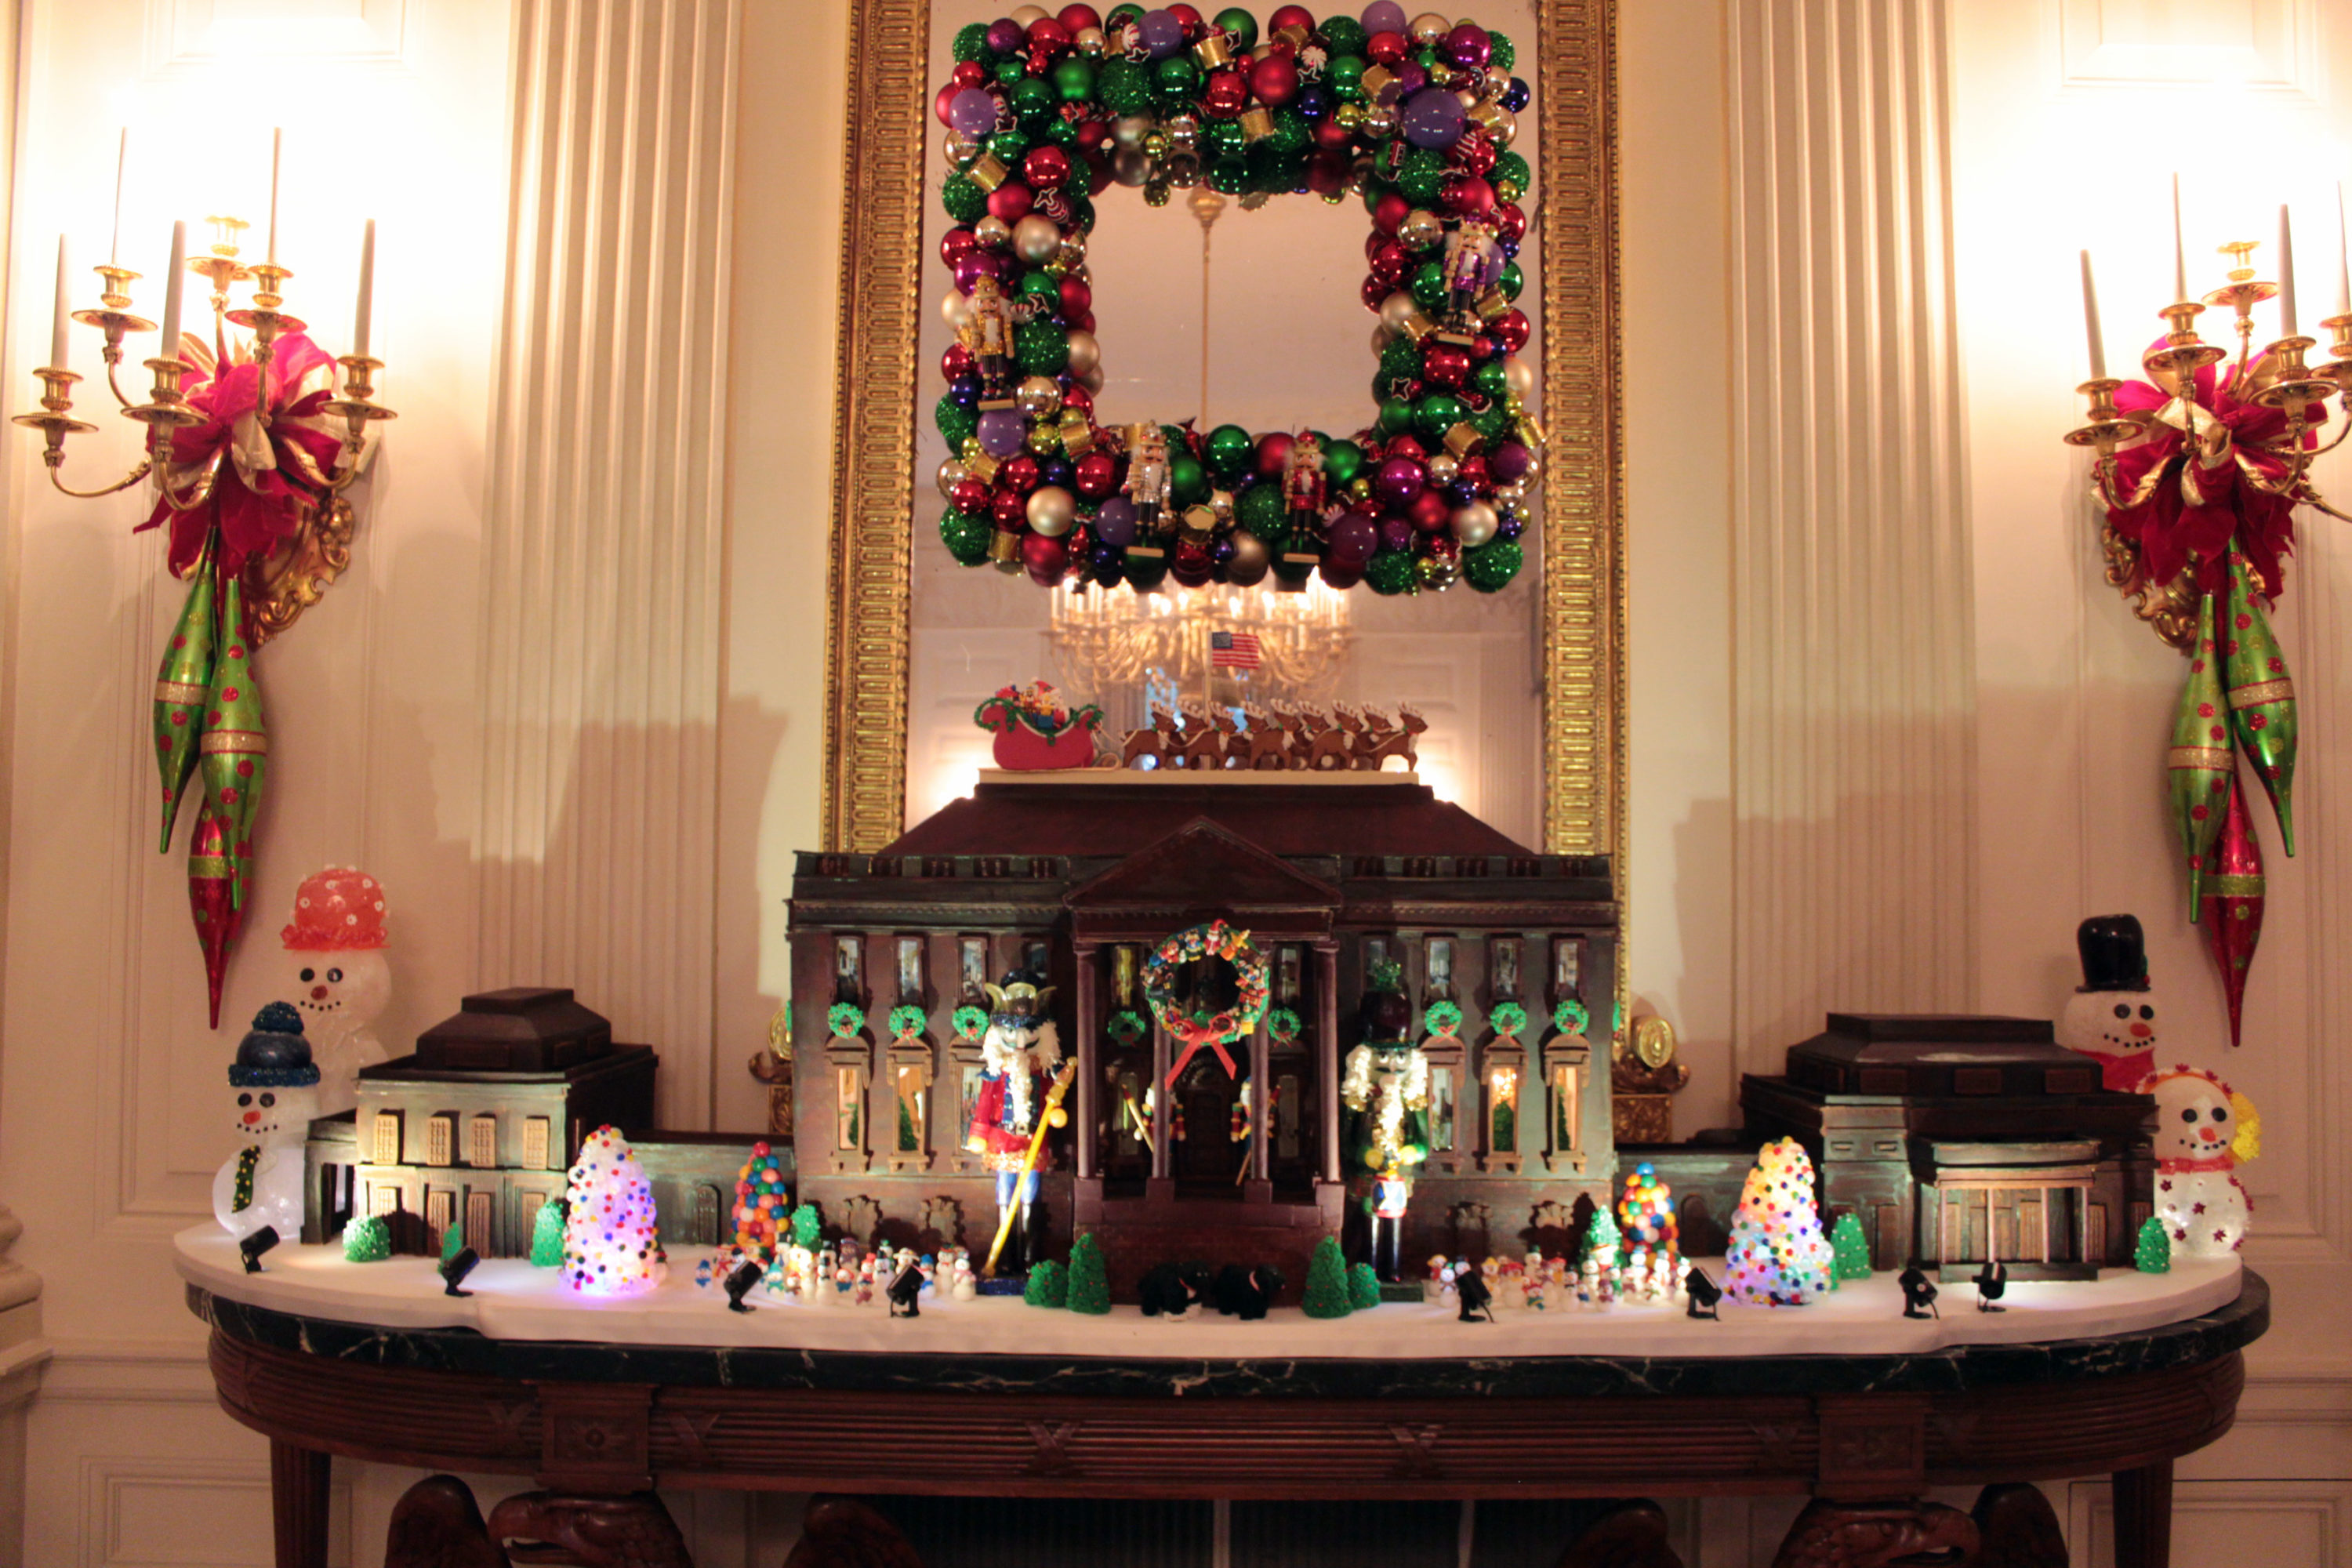 The gingerbread White House–now with an East and West Wing